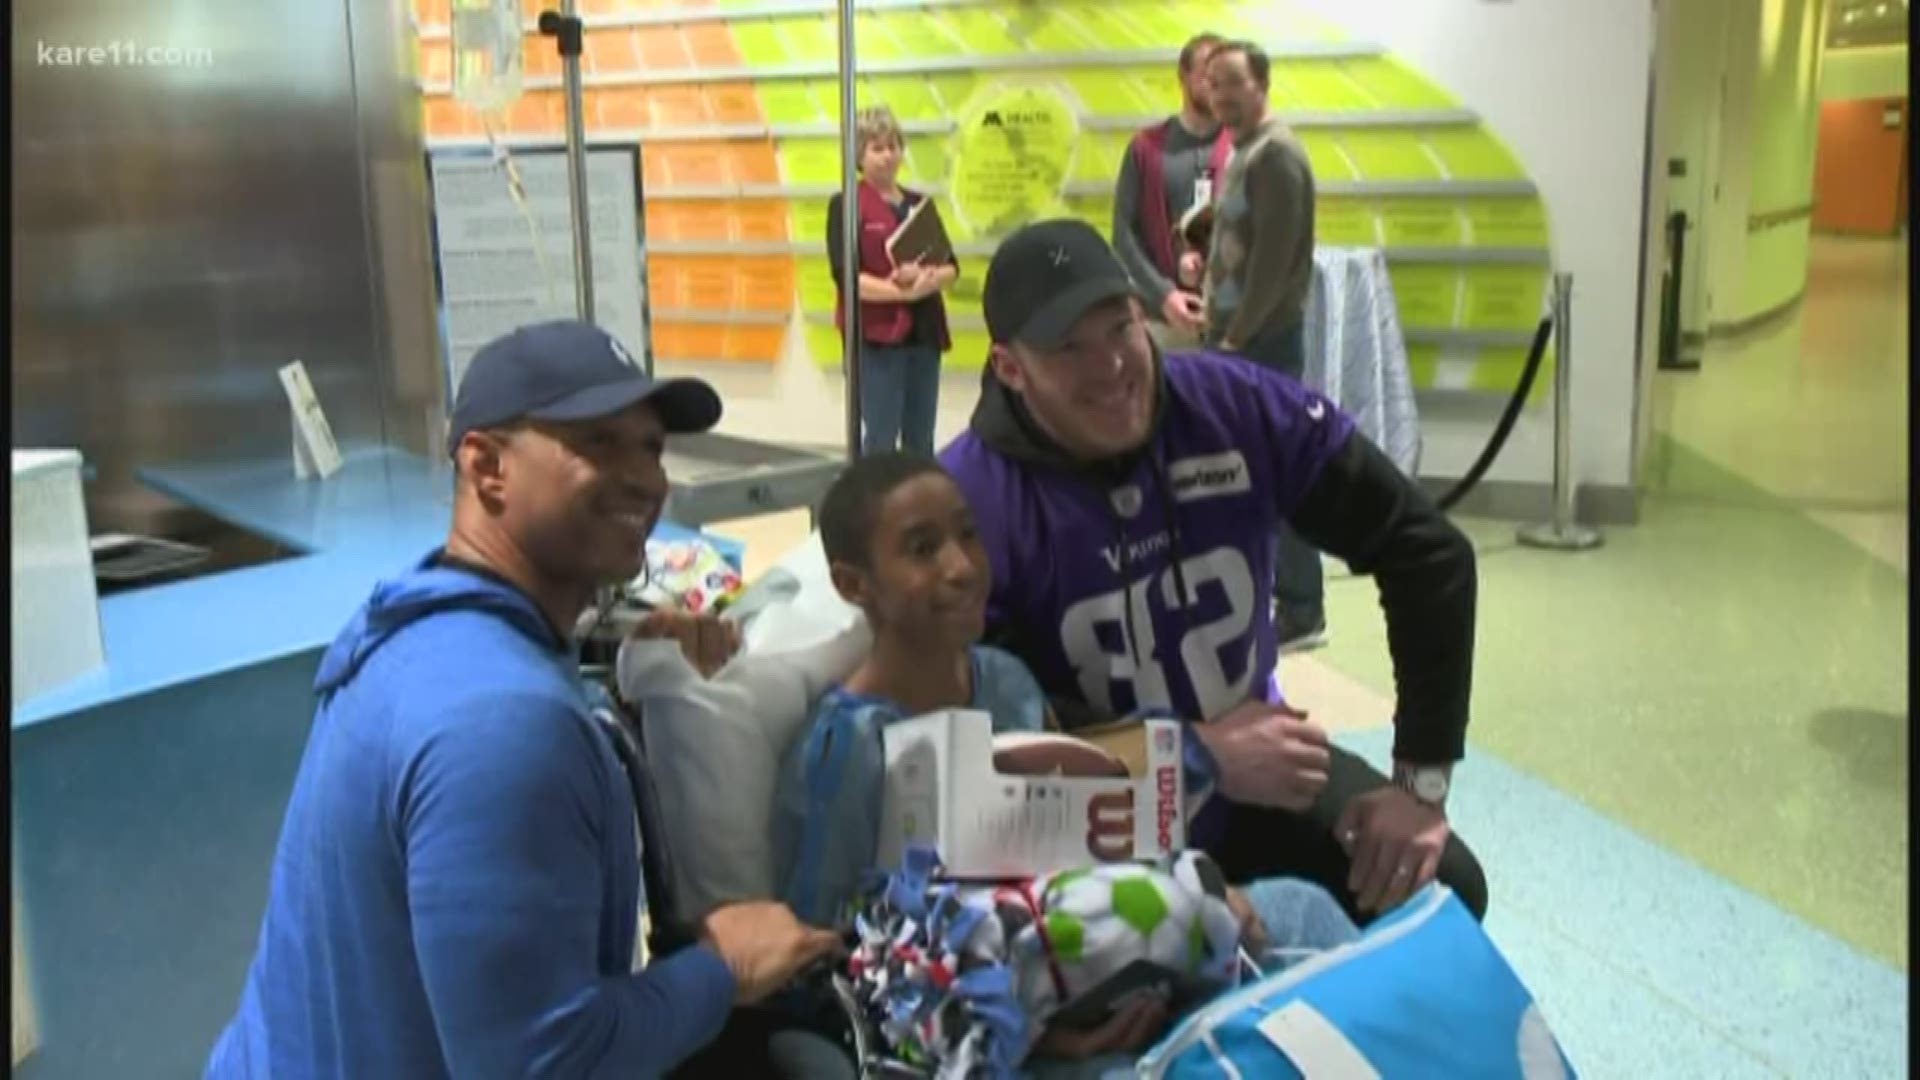 Vikings Tight End Kyle Rudolph has never been one to just watch when people are in need.